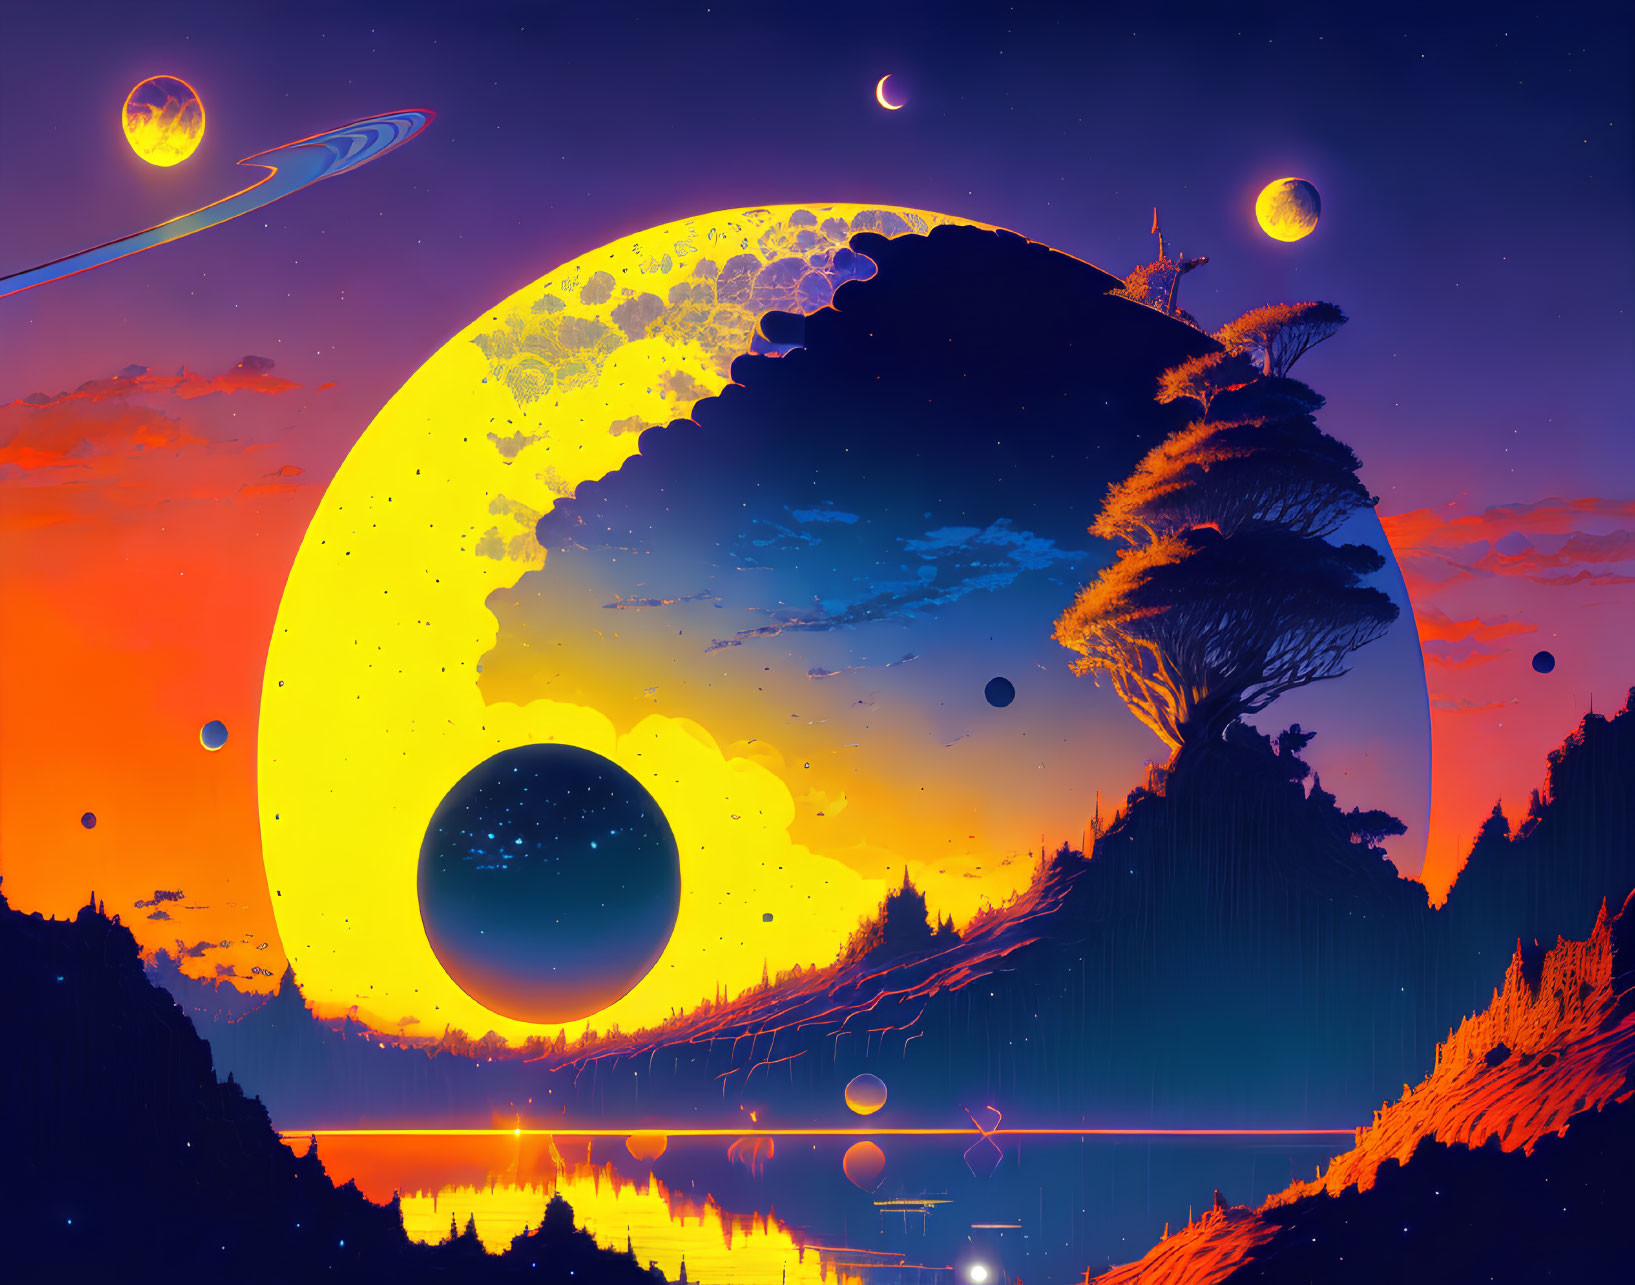 Surreal landscape with multiple moons and floating islands